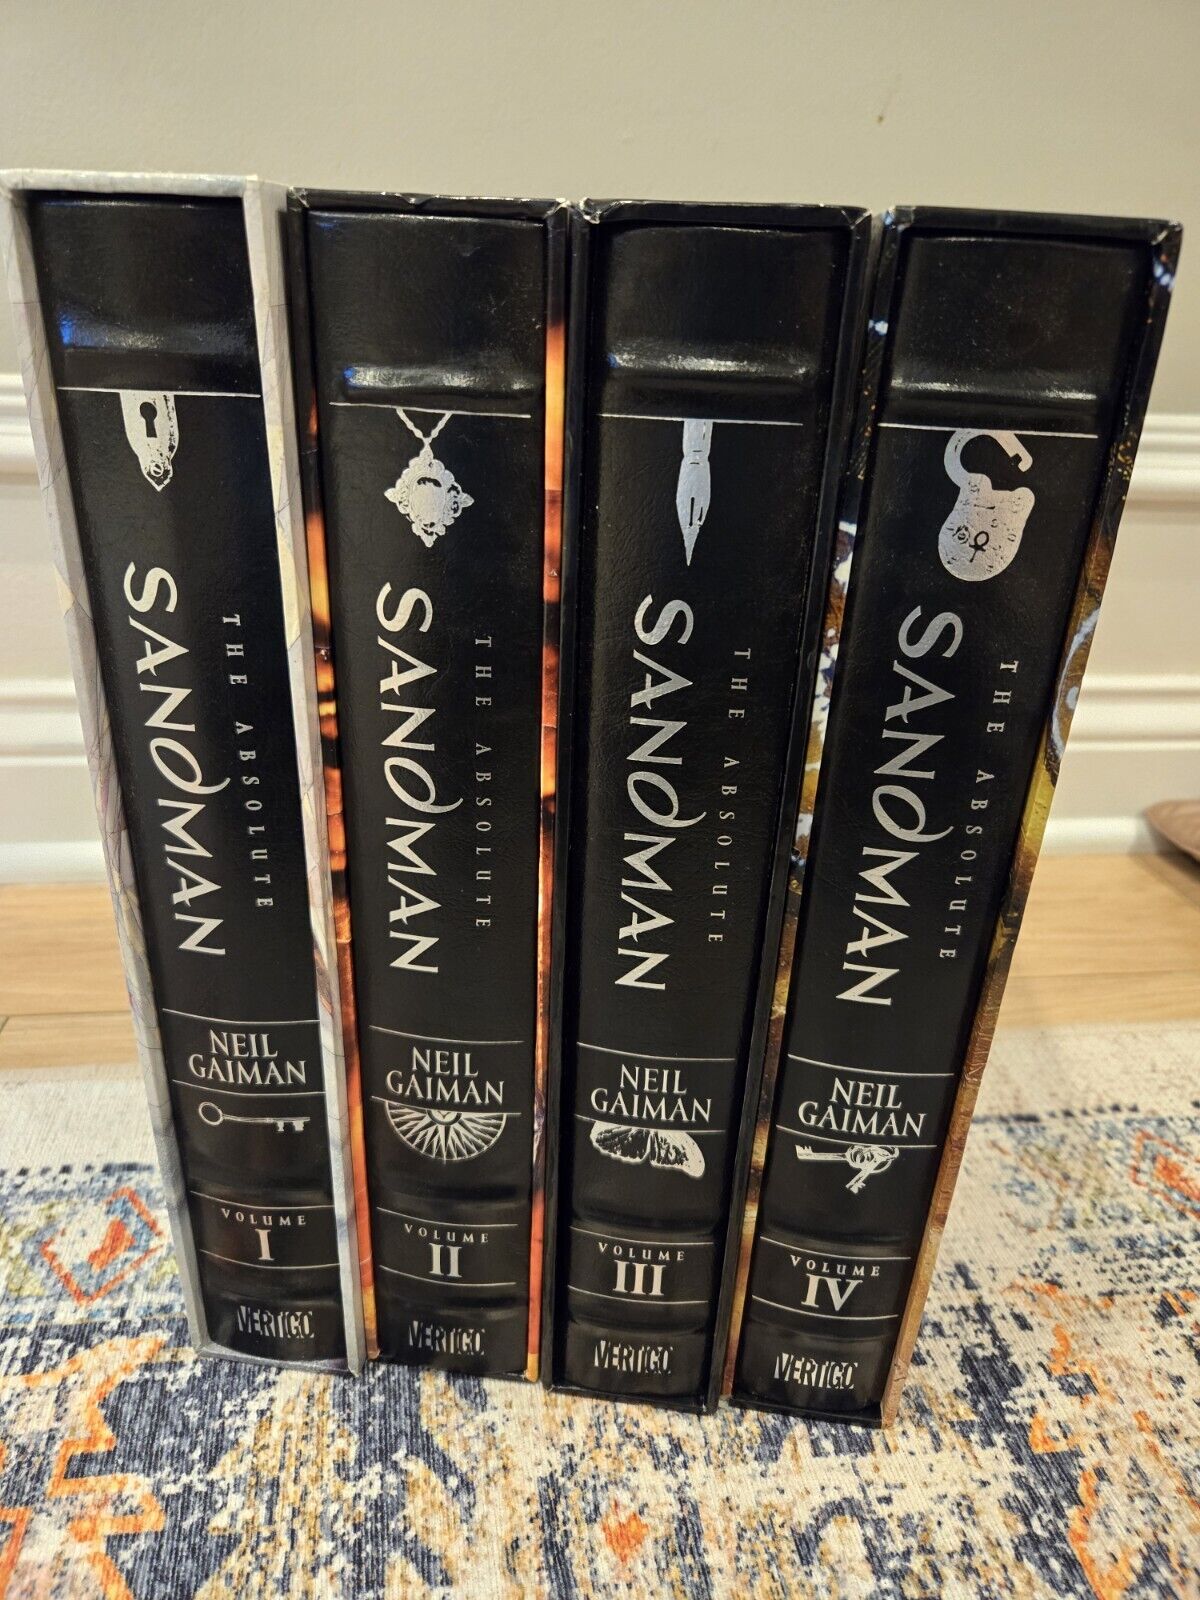 Absolute Sandman Collection Neil Gaiman Vol 1-4 Leather Bound Slip Cover 1 2 3 4